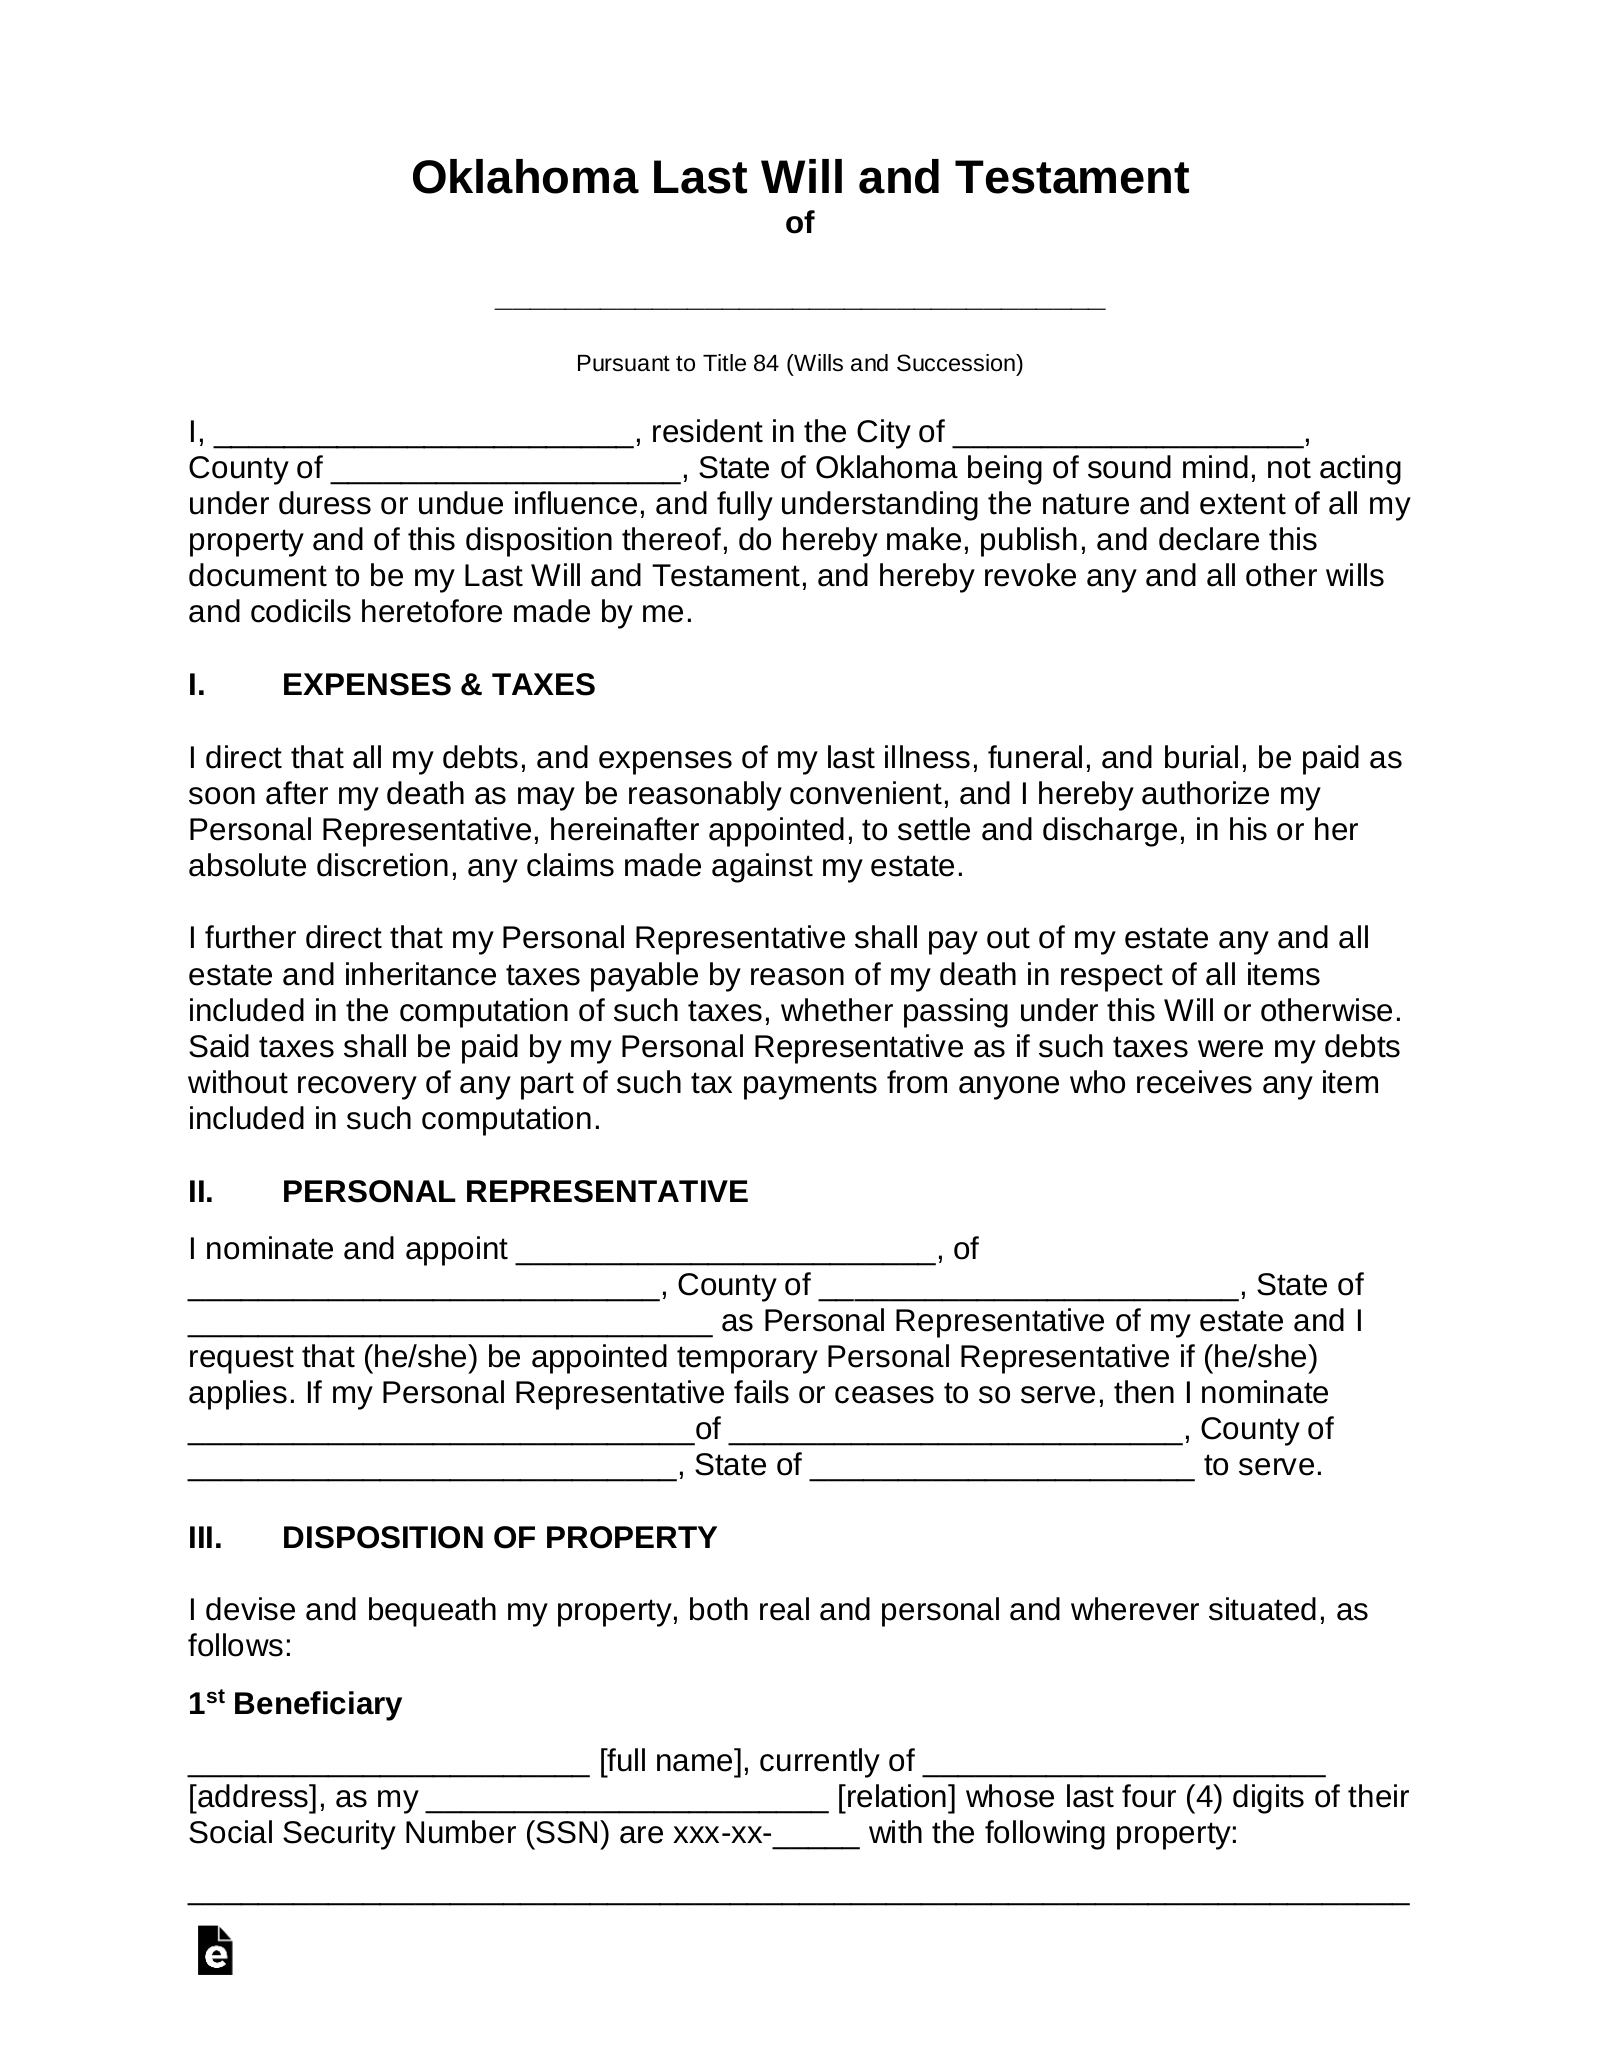 Oklahoma Last Will and Testament Template